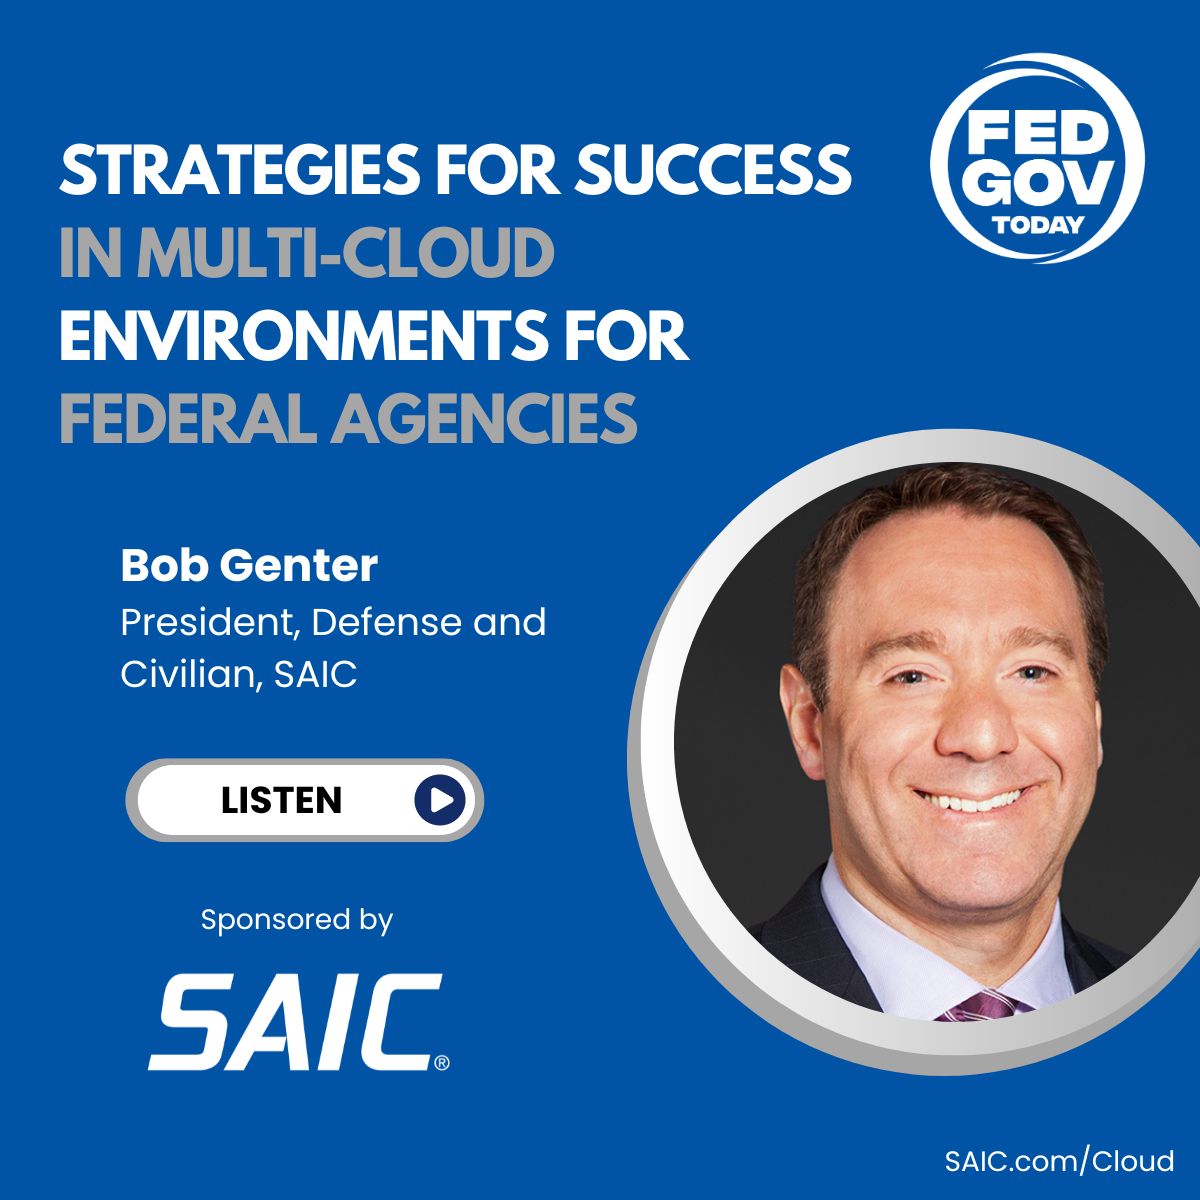 SAIC's Bob Genter joins @fedgovtoday @FRoseDC to discuss best practices for successful #multicloud adoption and highlights the importance of having a clear strategy and roadmap for modernization. Listen to the #podcast here: saic.co/3MWaSOK